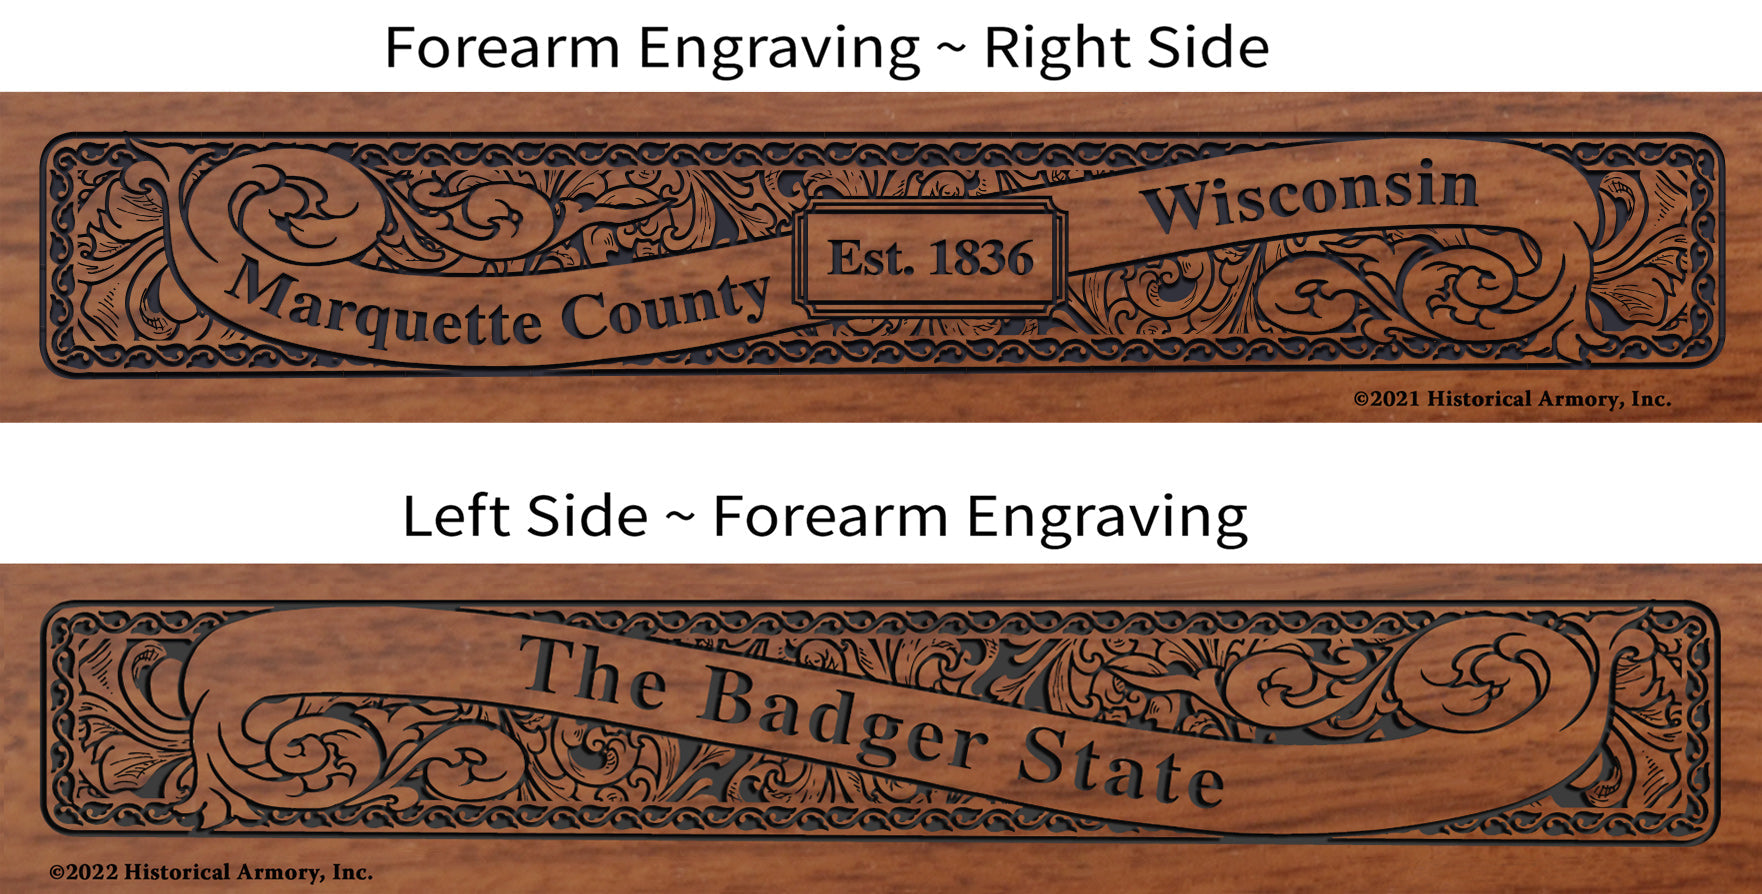 Marquette County Wisconsin Engraved Rifle Forearm